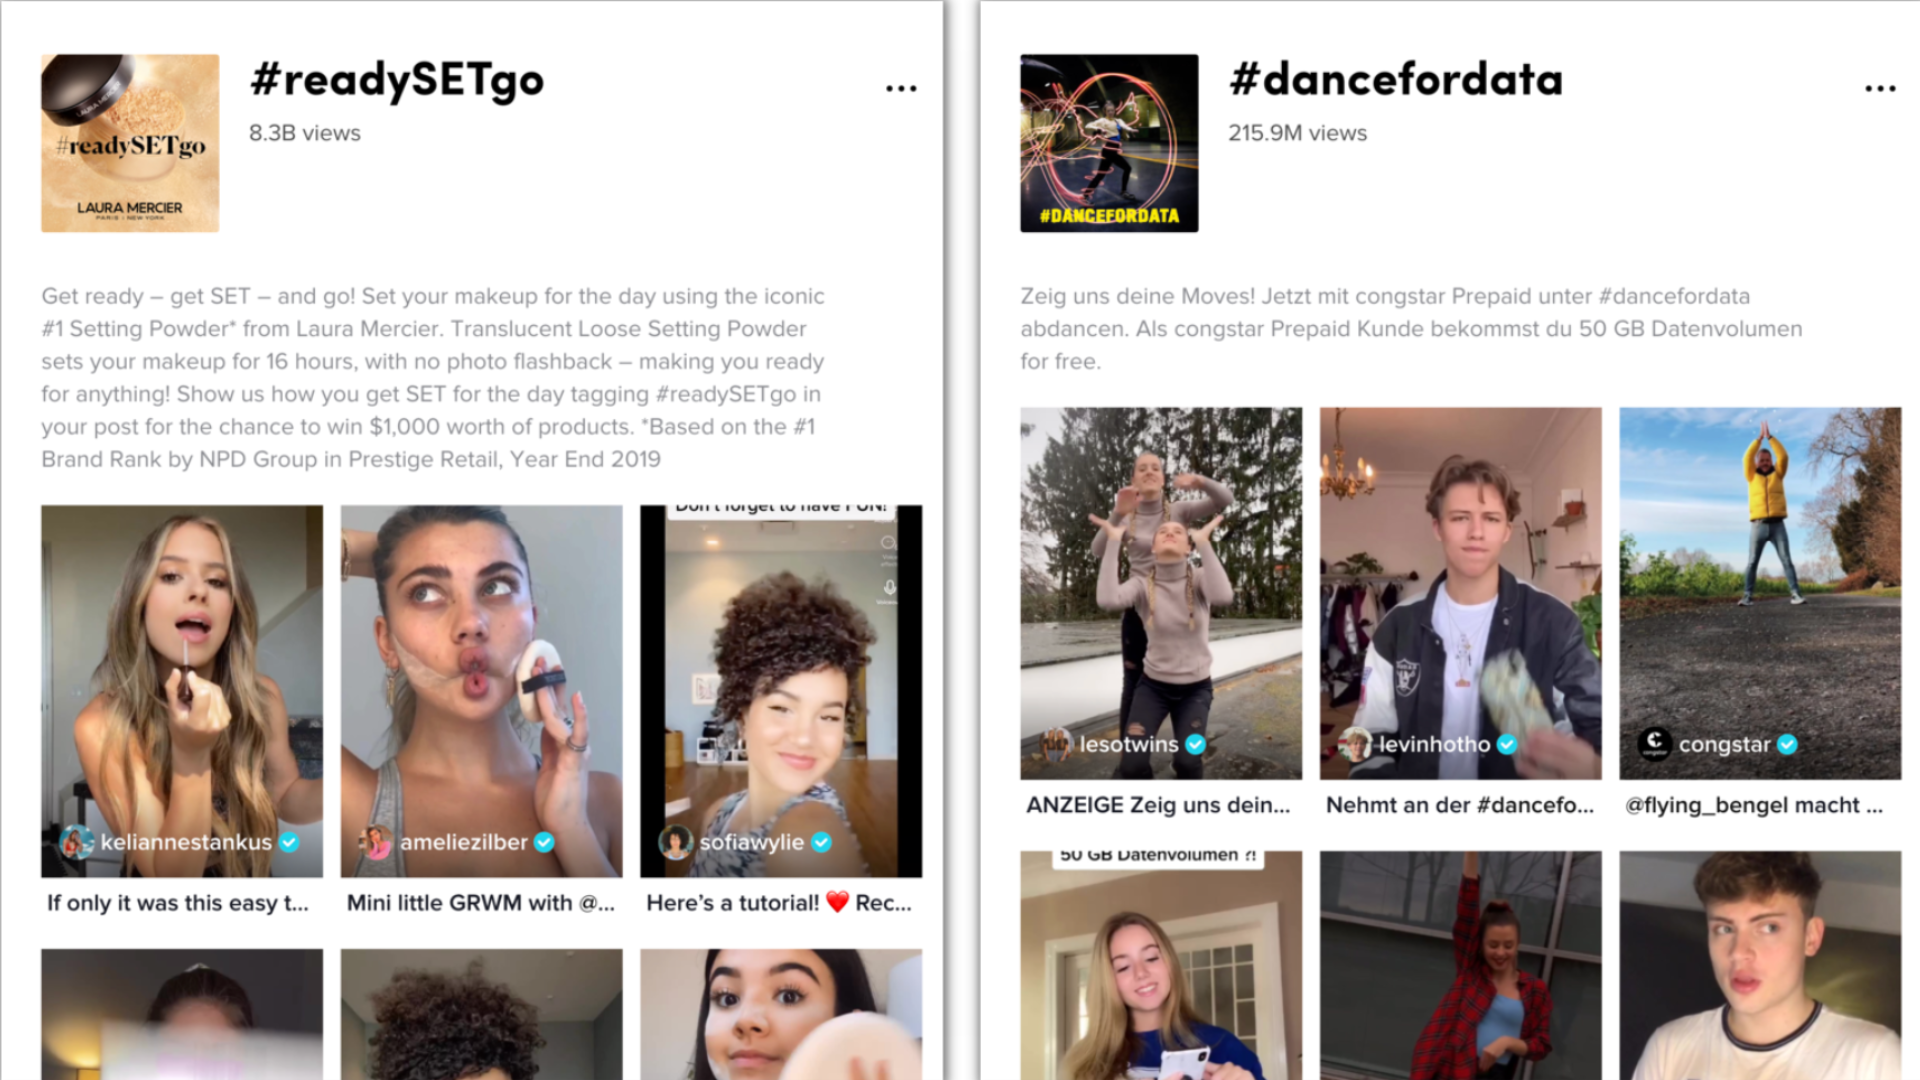 how does a branded hashtag challenge work?